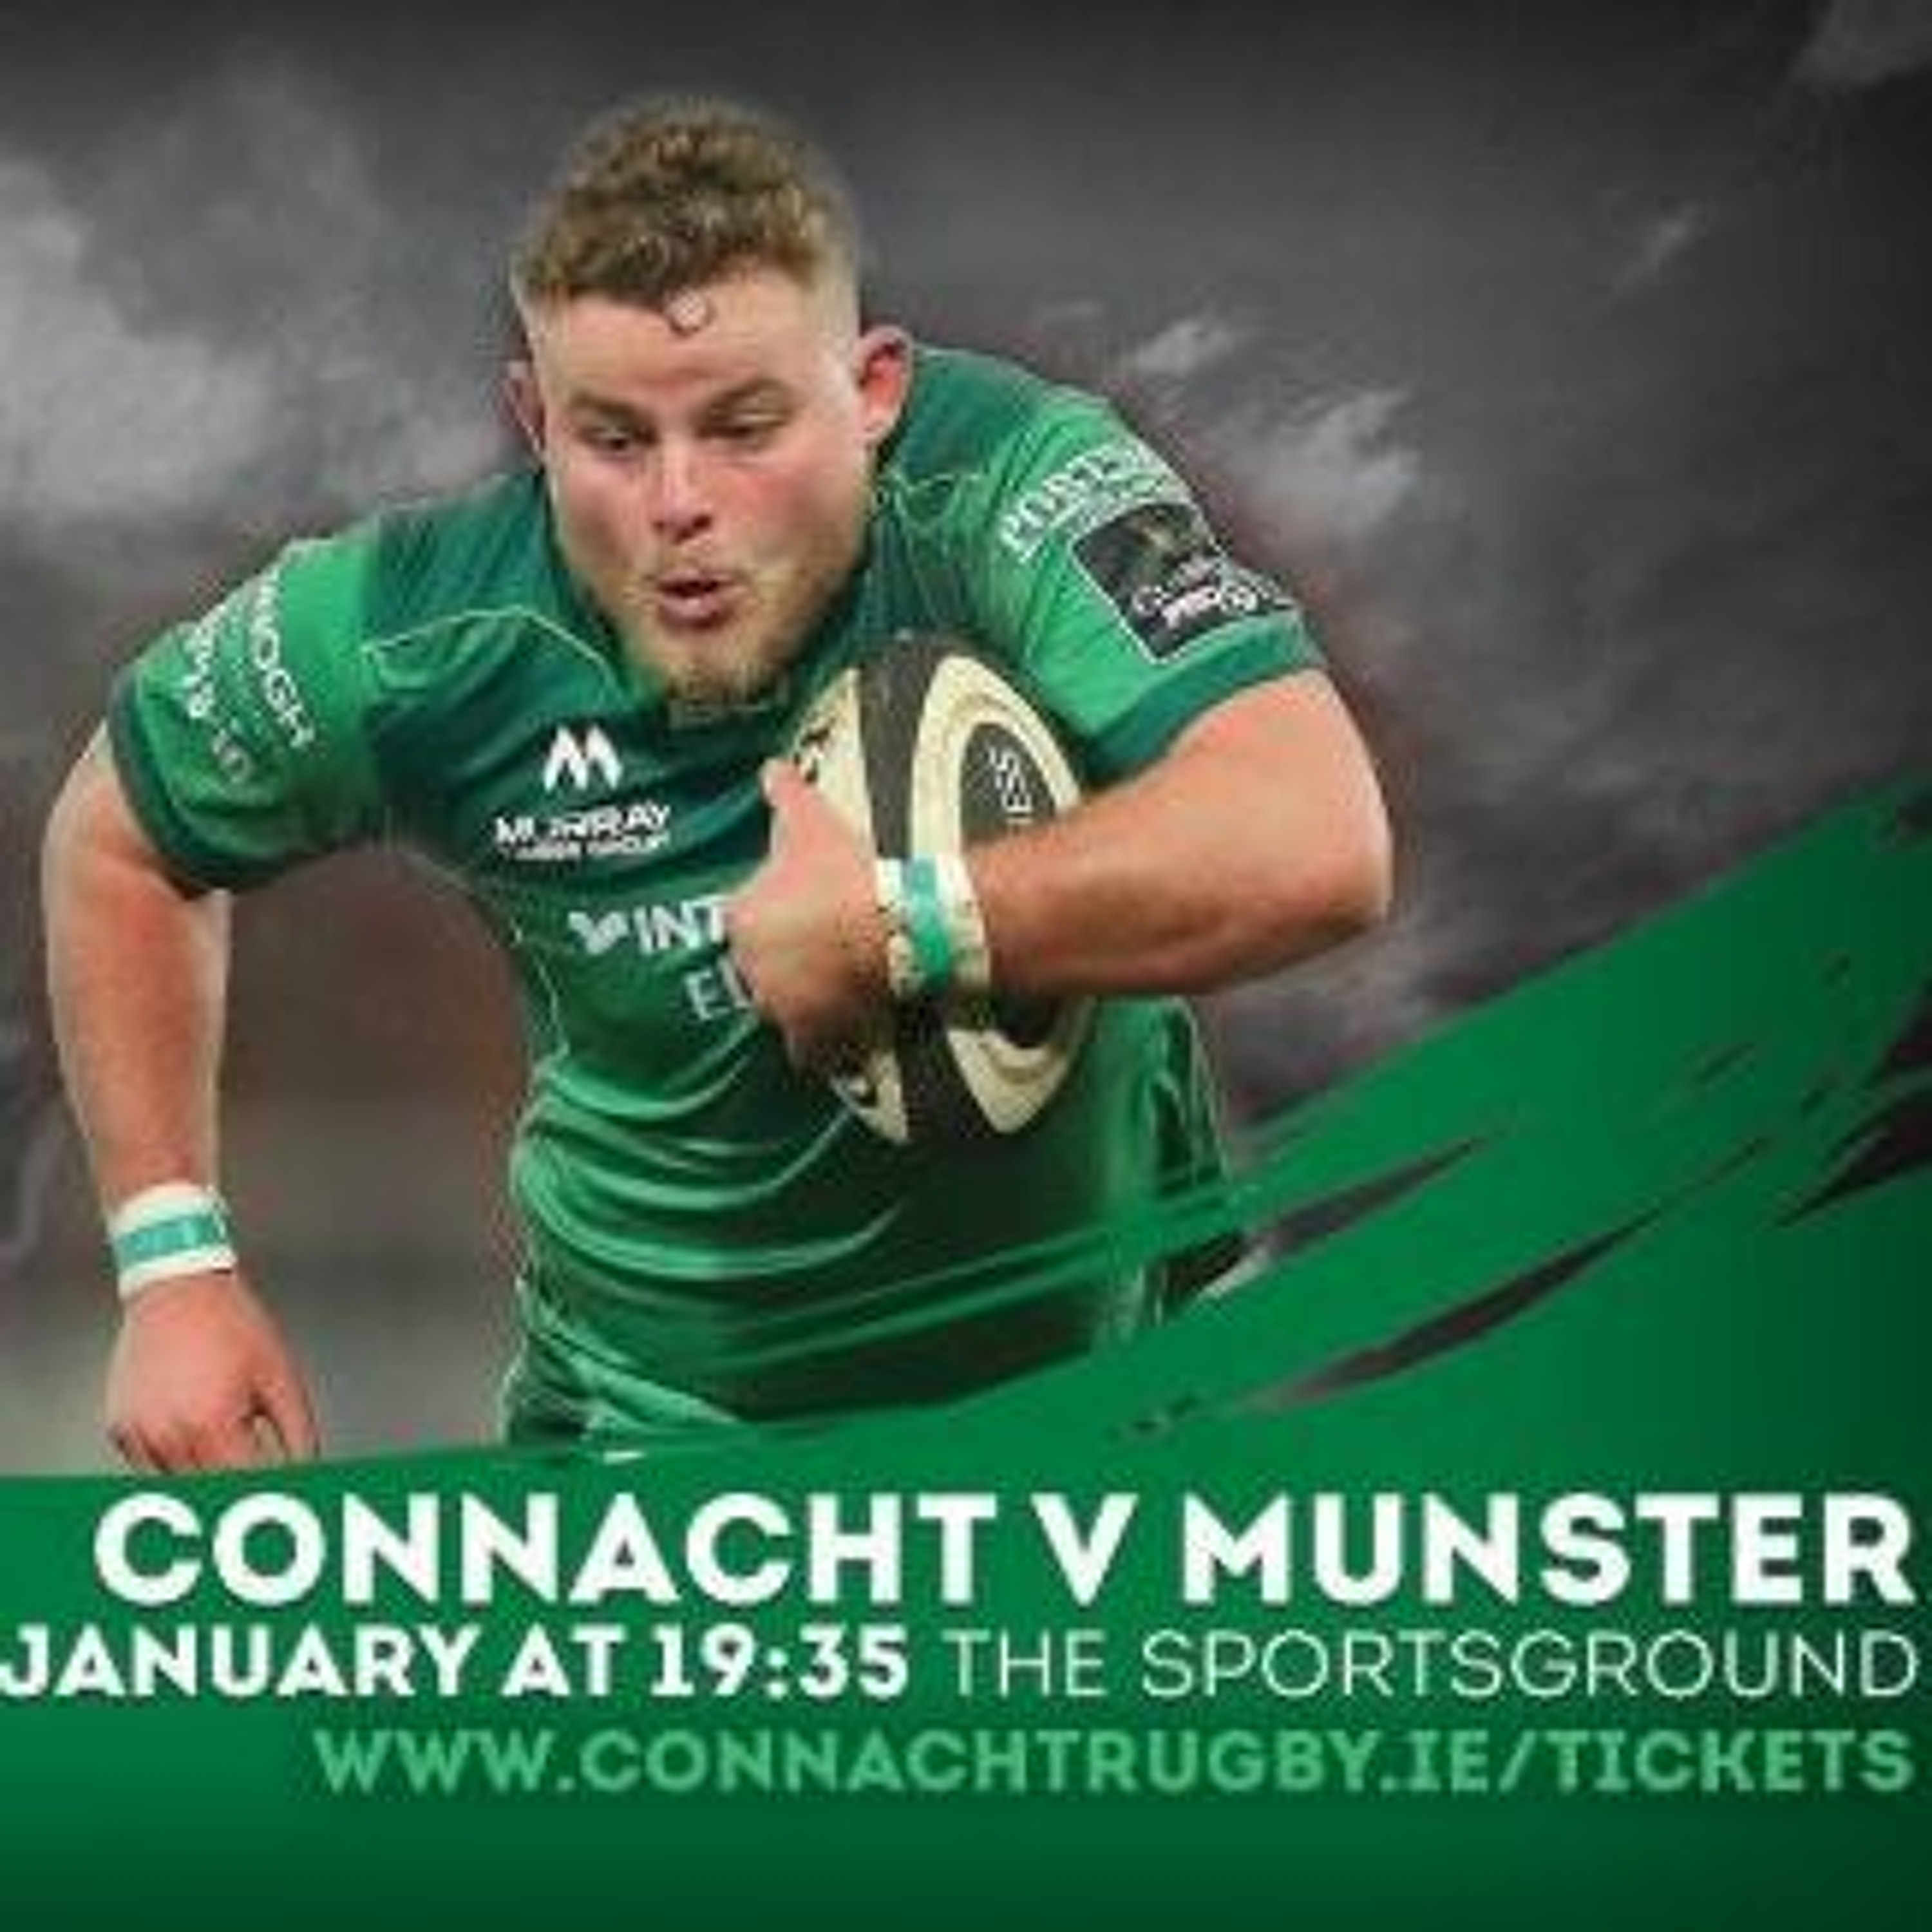 Midweek prior to Munster at home - Craggy Rugby